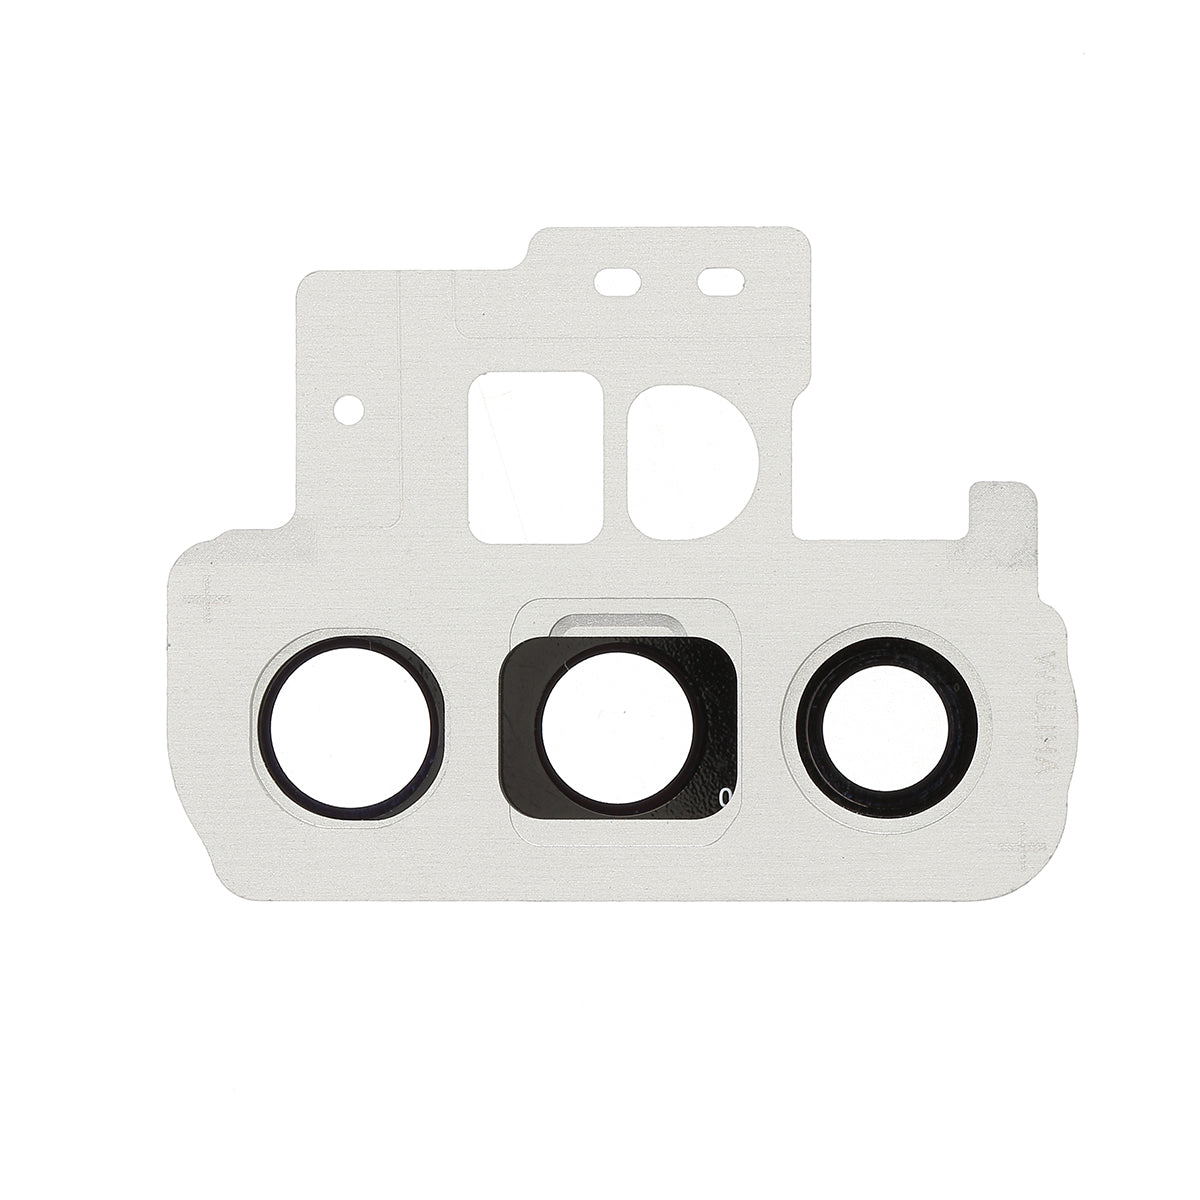 OEM Rear Camera Lens Ring Cover Replacement Part for Samsung Galaxy Note 10 Plus SM-N975 - White